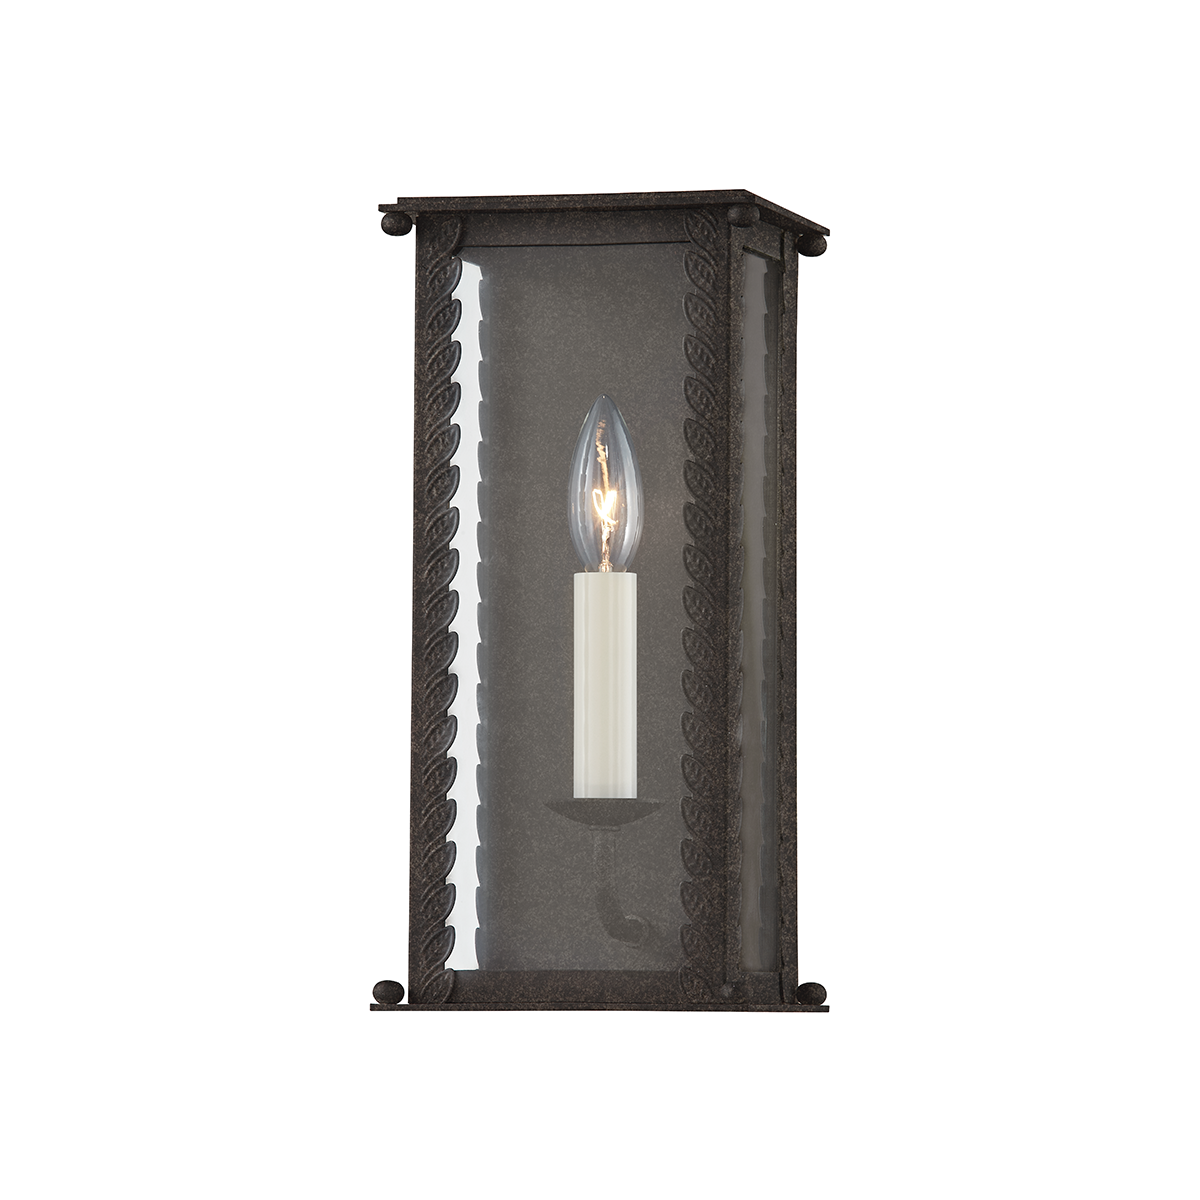 Troy ZUMA 1 LIGHT SMALL EXTERIOR WALL SCONCE B6711 Outdoor l Wall Troy Lighting   